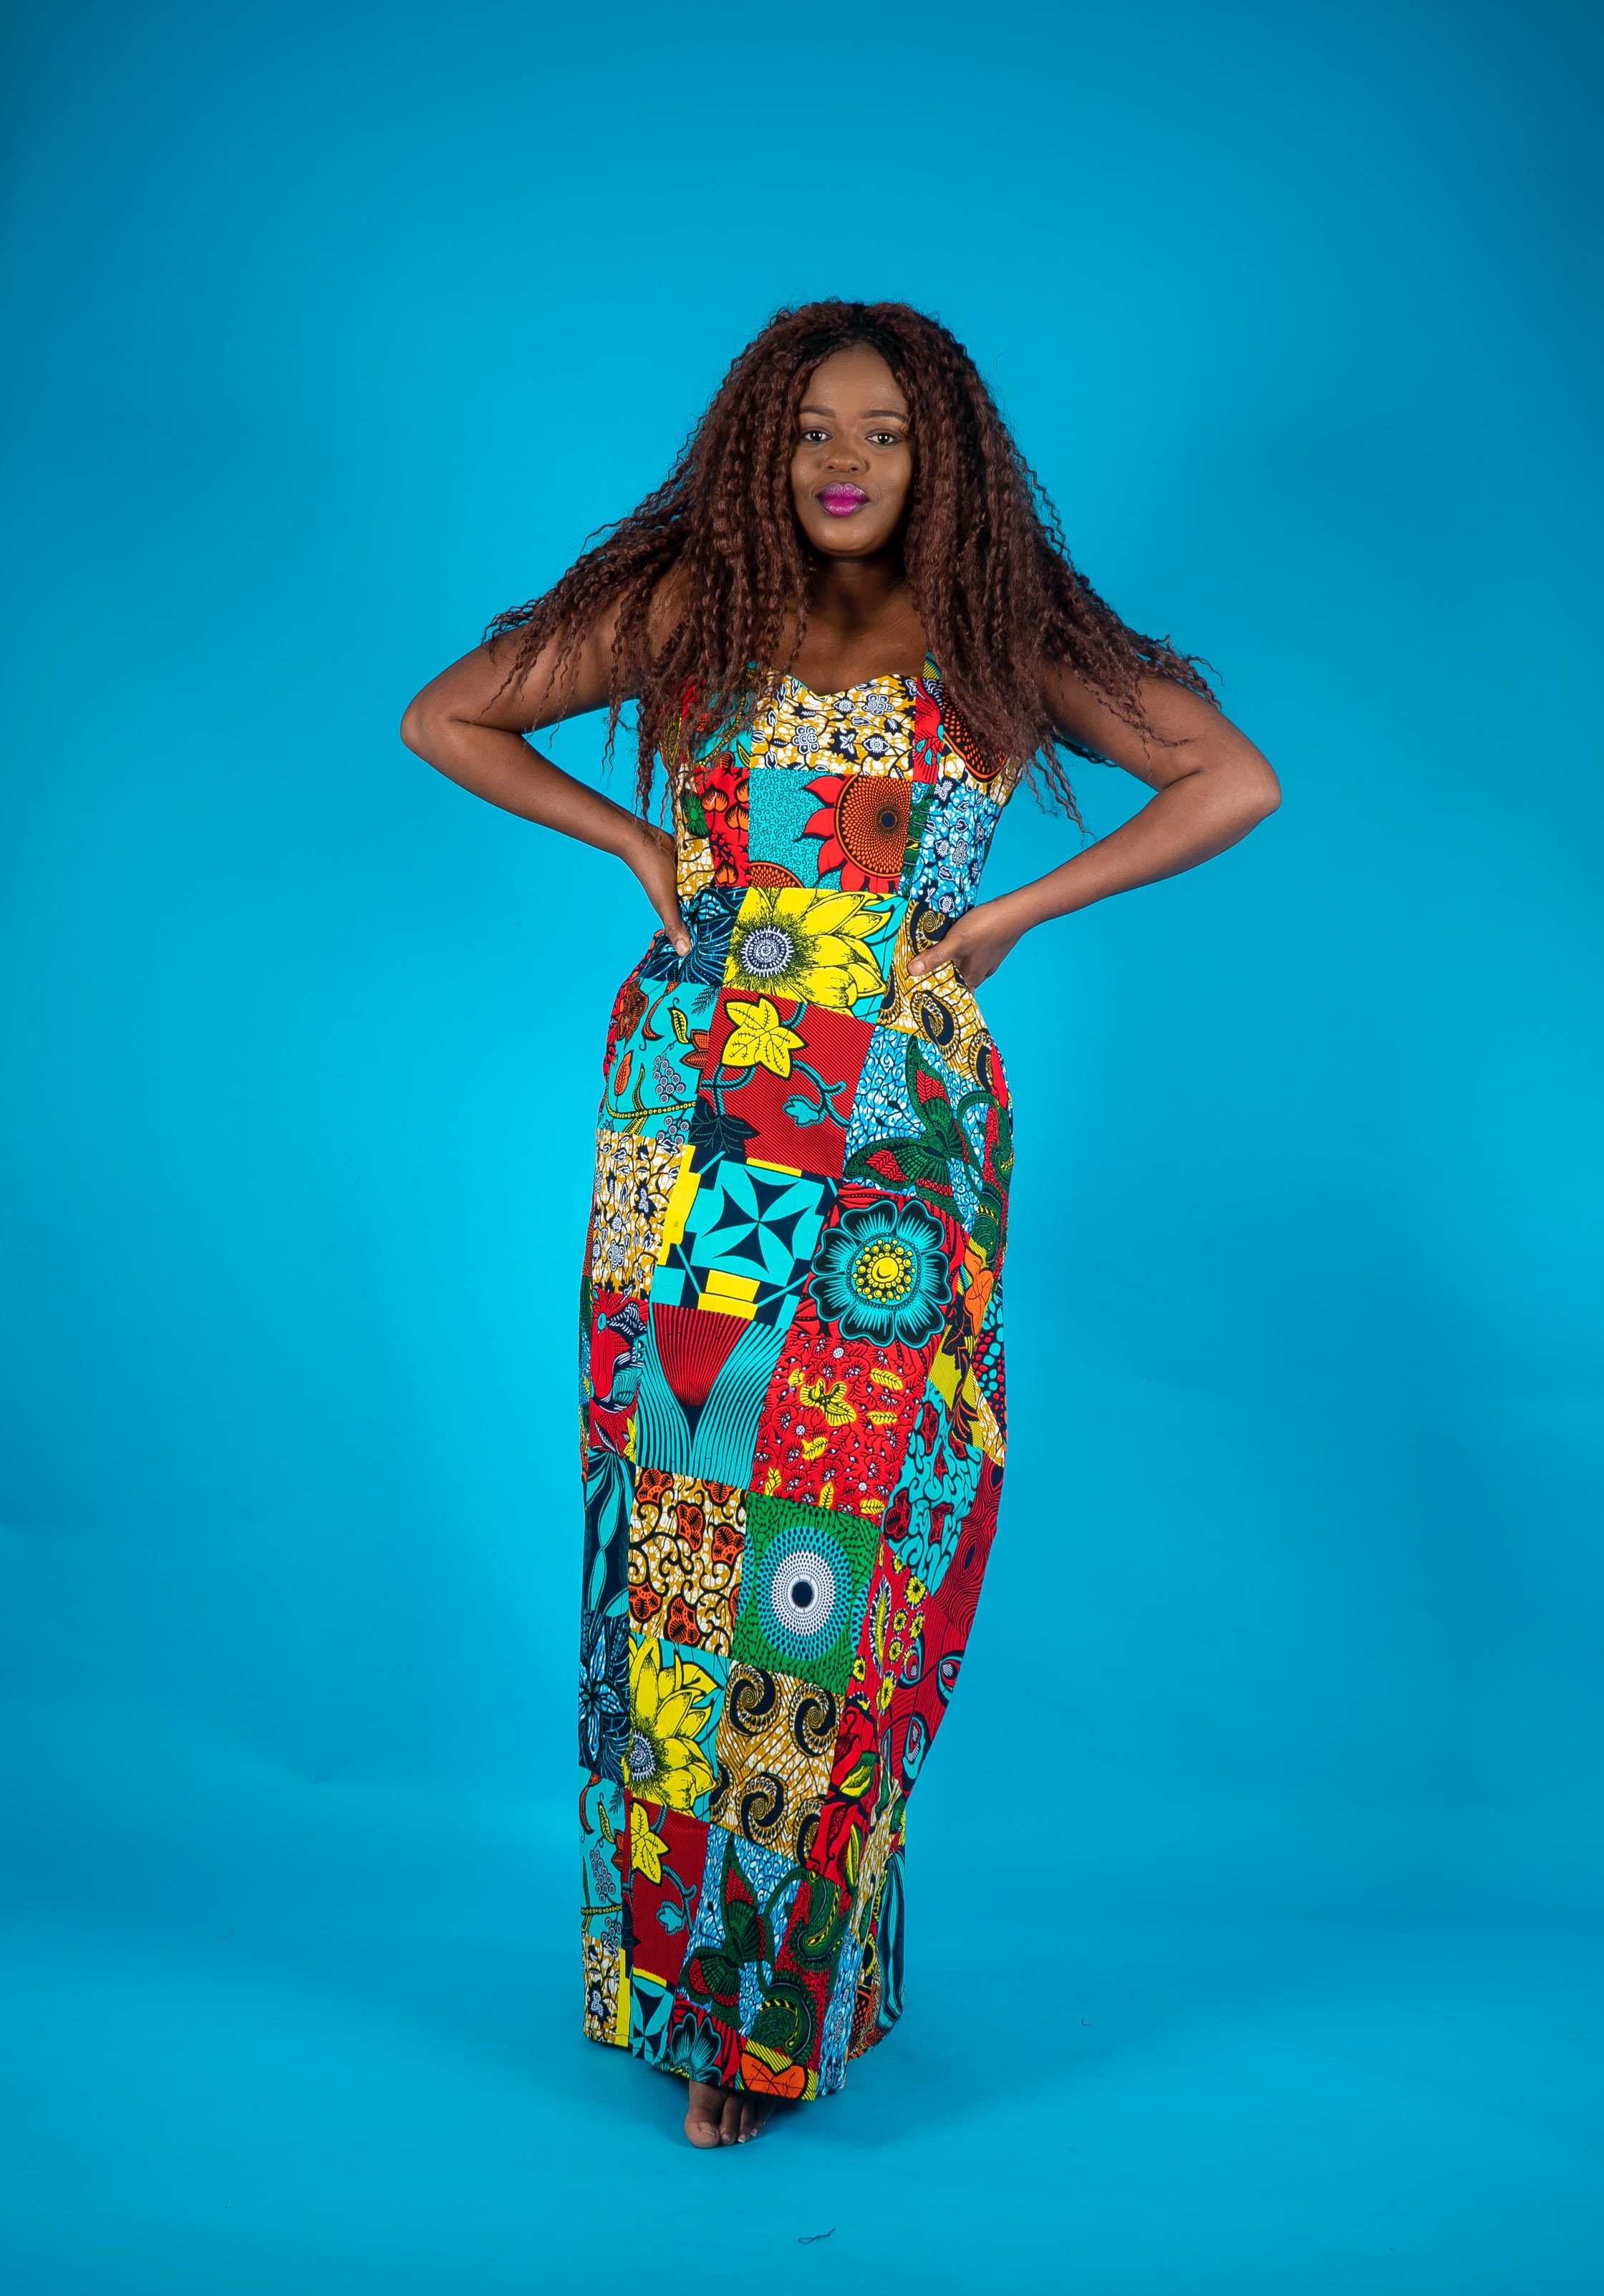 temad collections african print ankara patches spaghetti straps maxi a line dress, Stylish African print dresses, Modern African dresses, Ankara dress for ladies, Latest Ankara dresses, Long Ankara dresses, ankara dresses Uk. Ankara dresses styles, stylish Ankara dresses, beautiful African dresses, African Ankara dresses for ladies, African dresses styles, ankara print, ankara maxi dresses,Ankara midi dresses, Ankara short dresses, African maxi dress, , African midi dress, , African short dress 